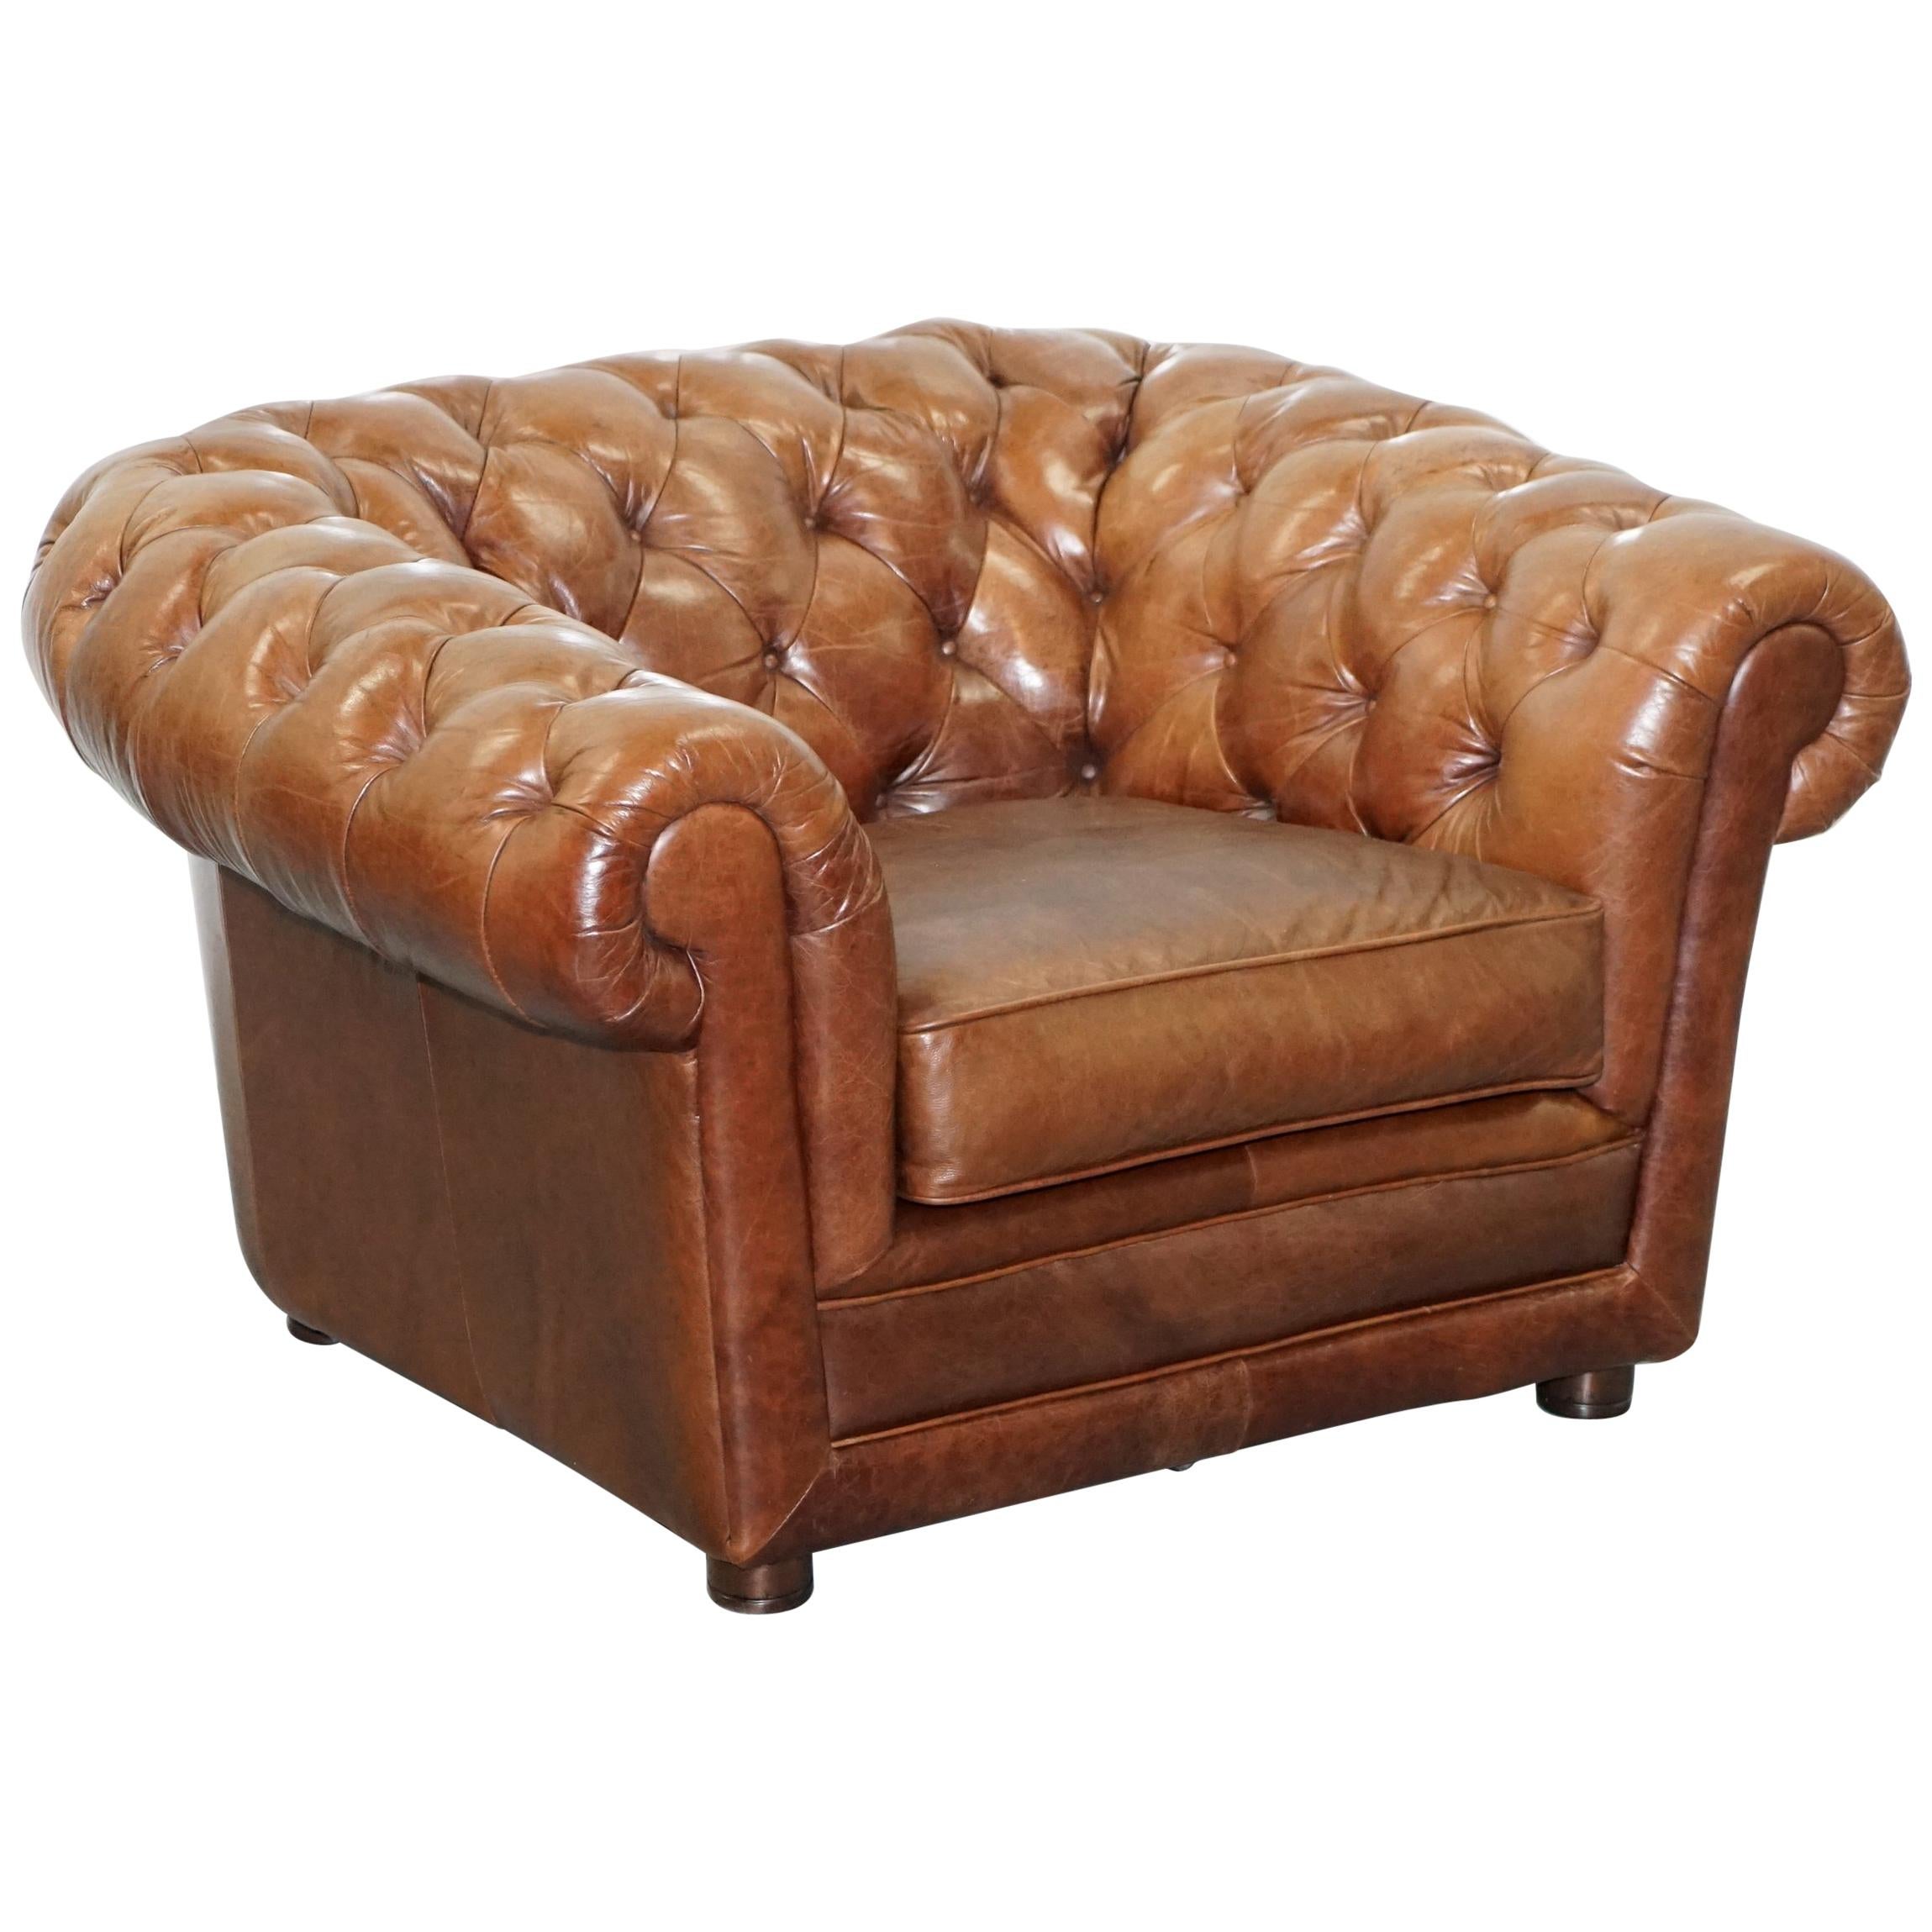 Large Heritage Leather Sloped Arm Aged Brown Leather Chesterfield Club Armchair